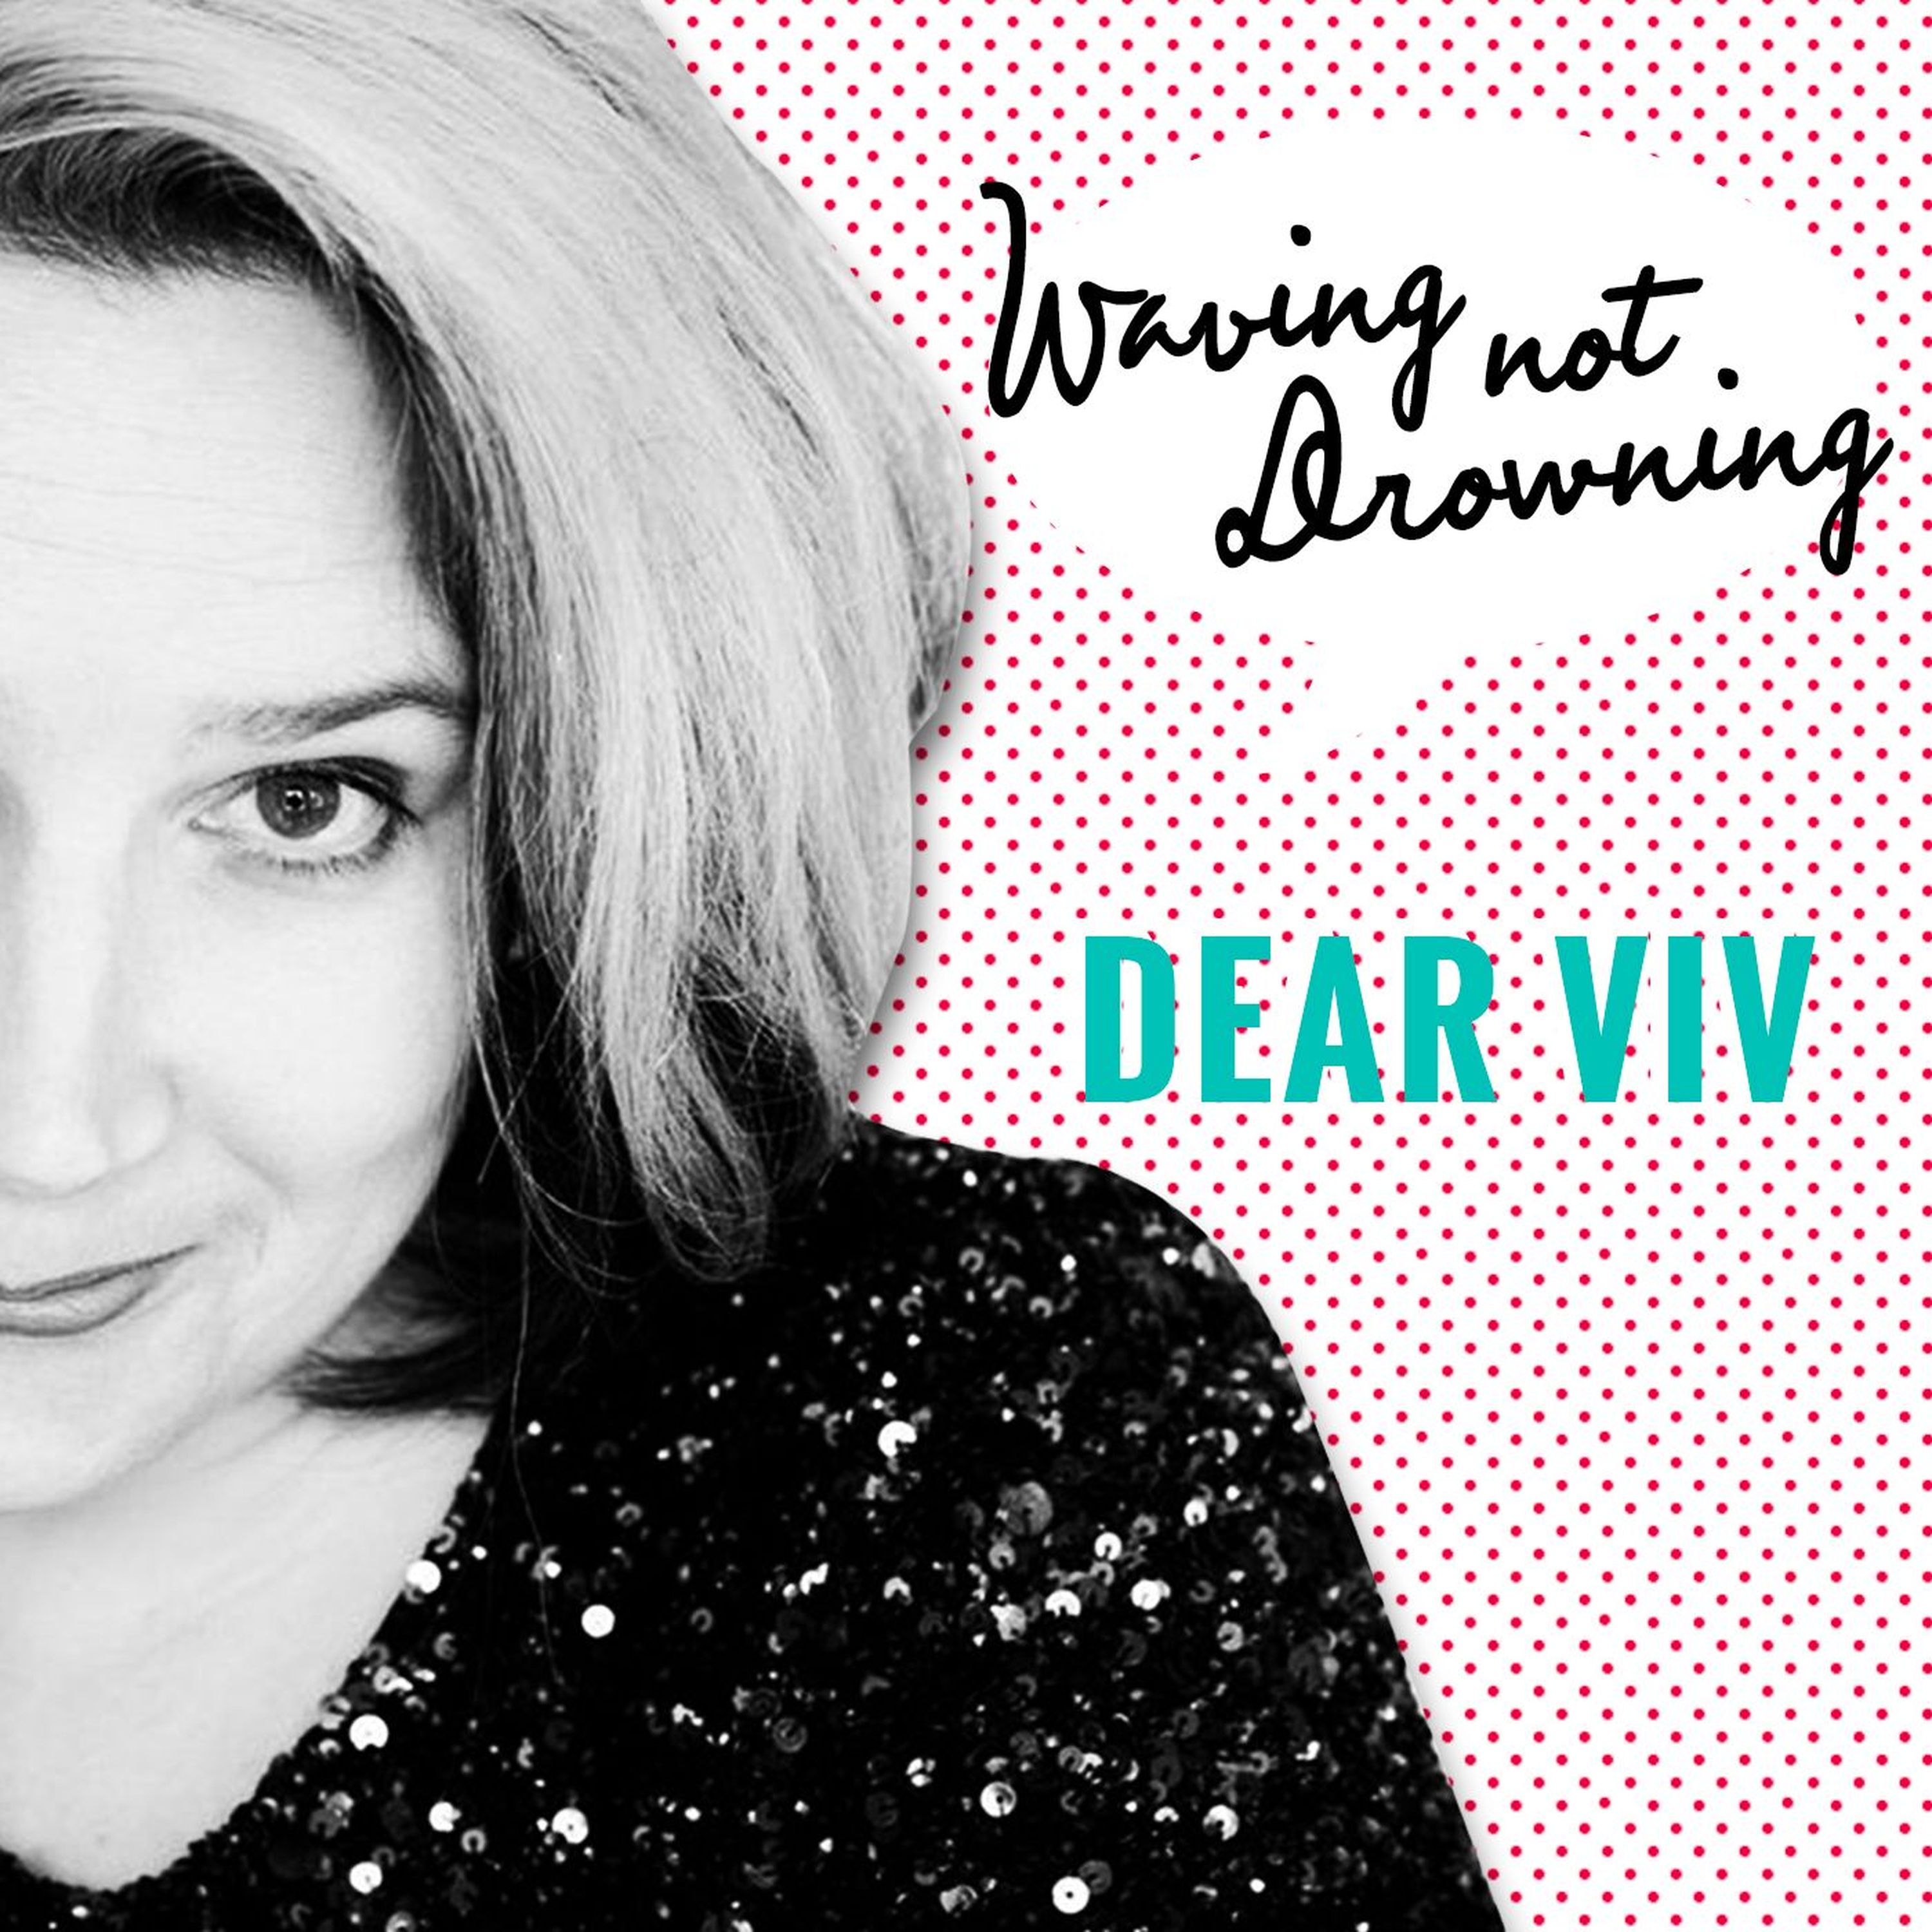 Dear Viv: I feel like I've turned into another person